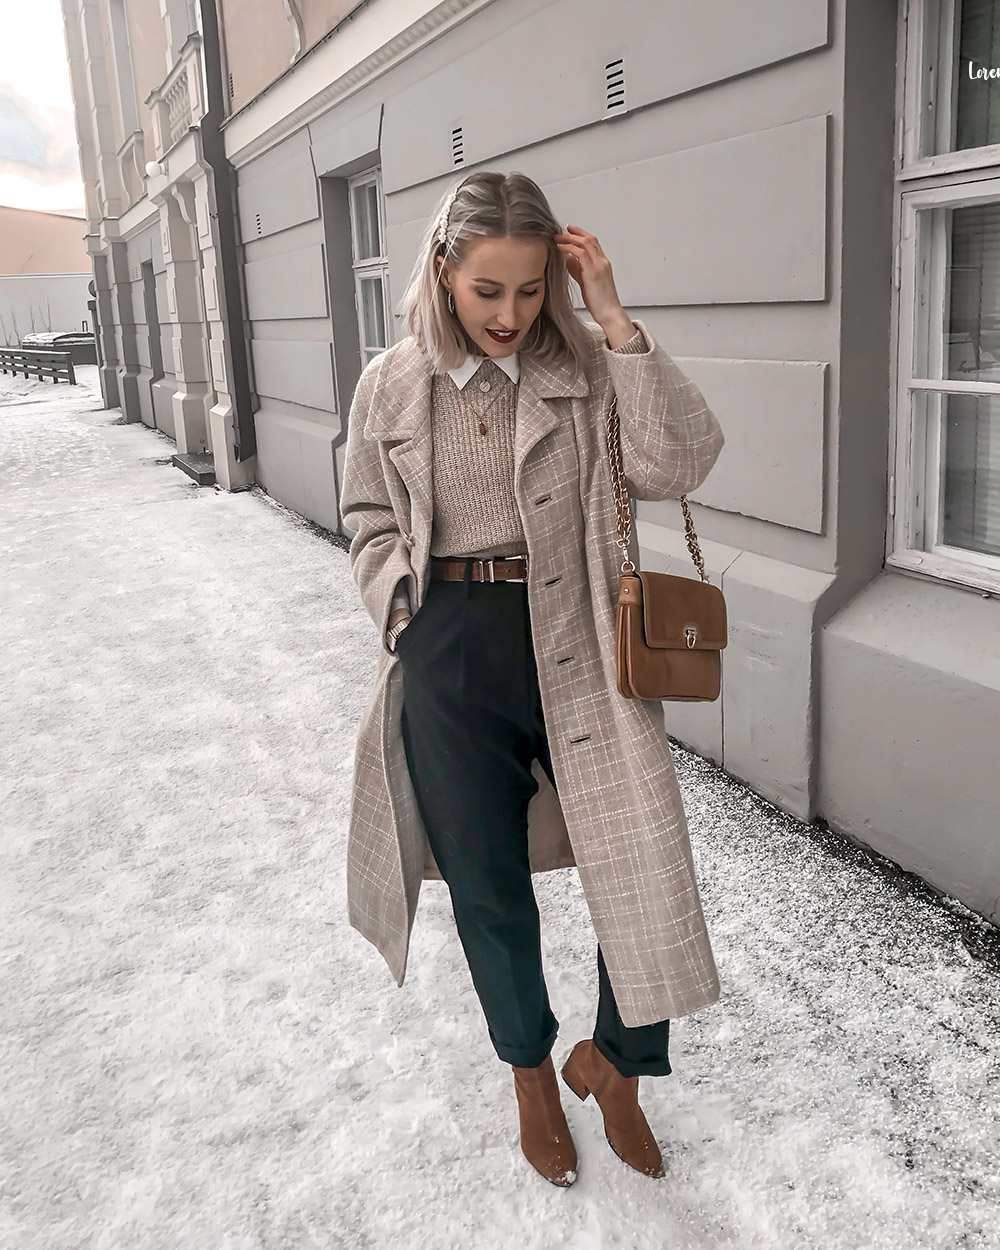 Winter Fashion Trends: 3 Key Pieces to Take Your Style Up a Notch